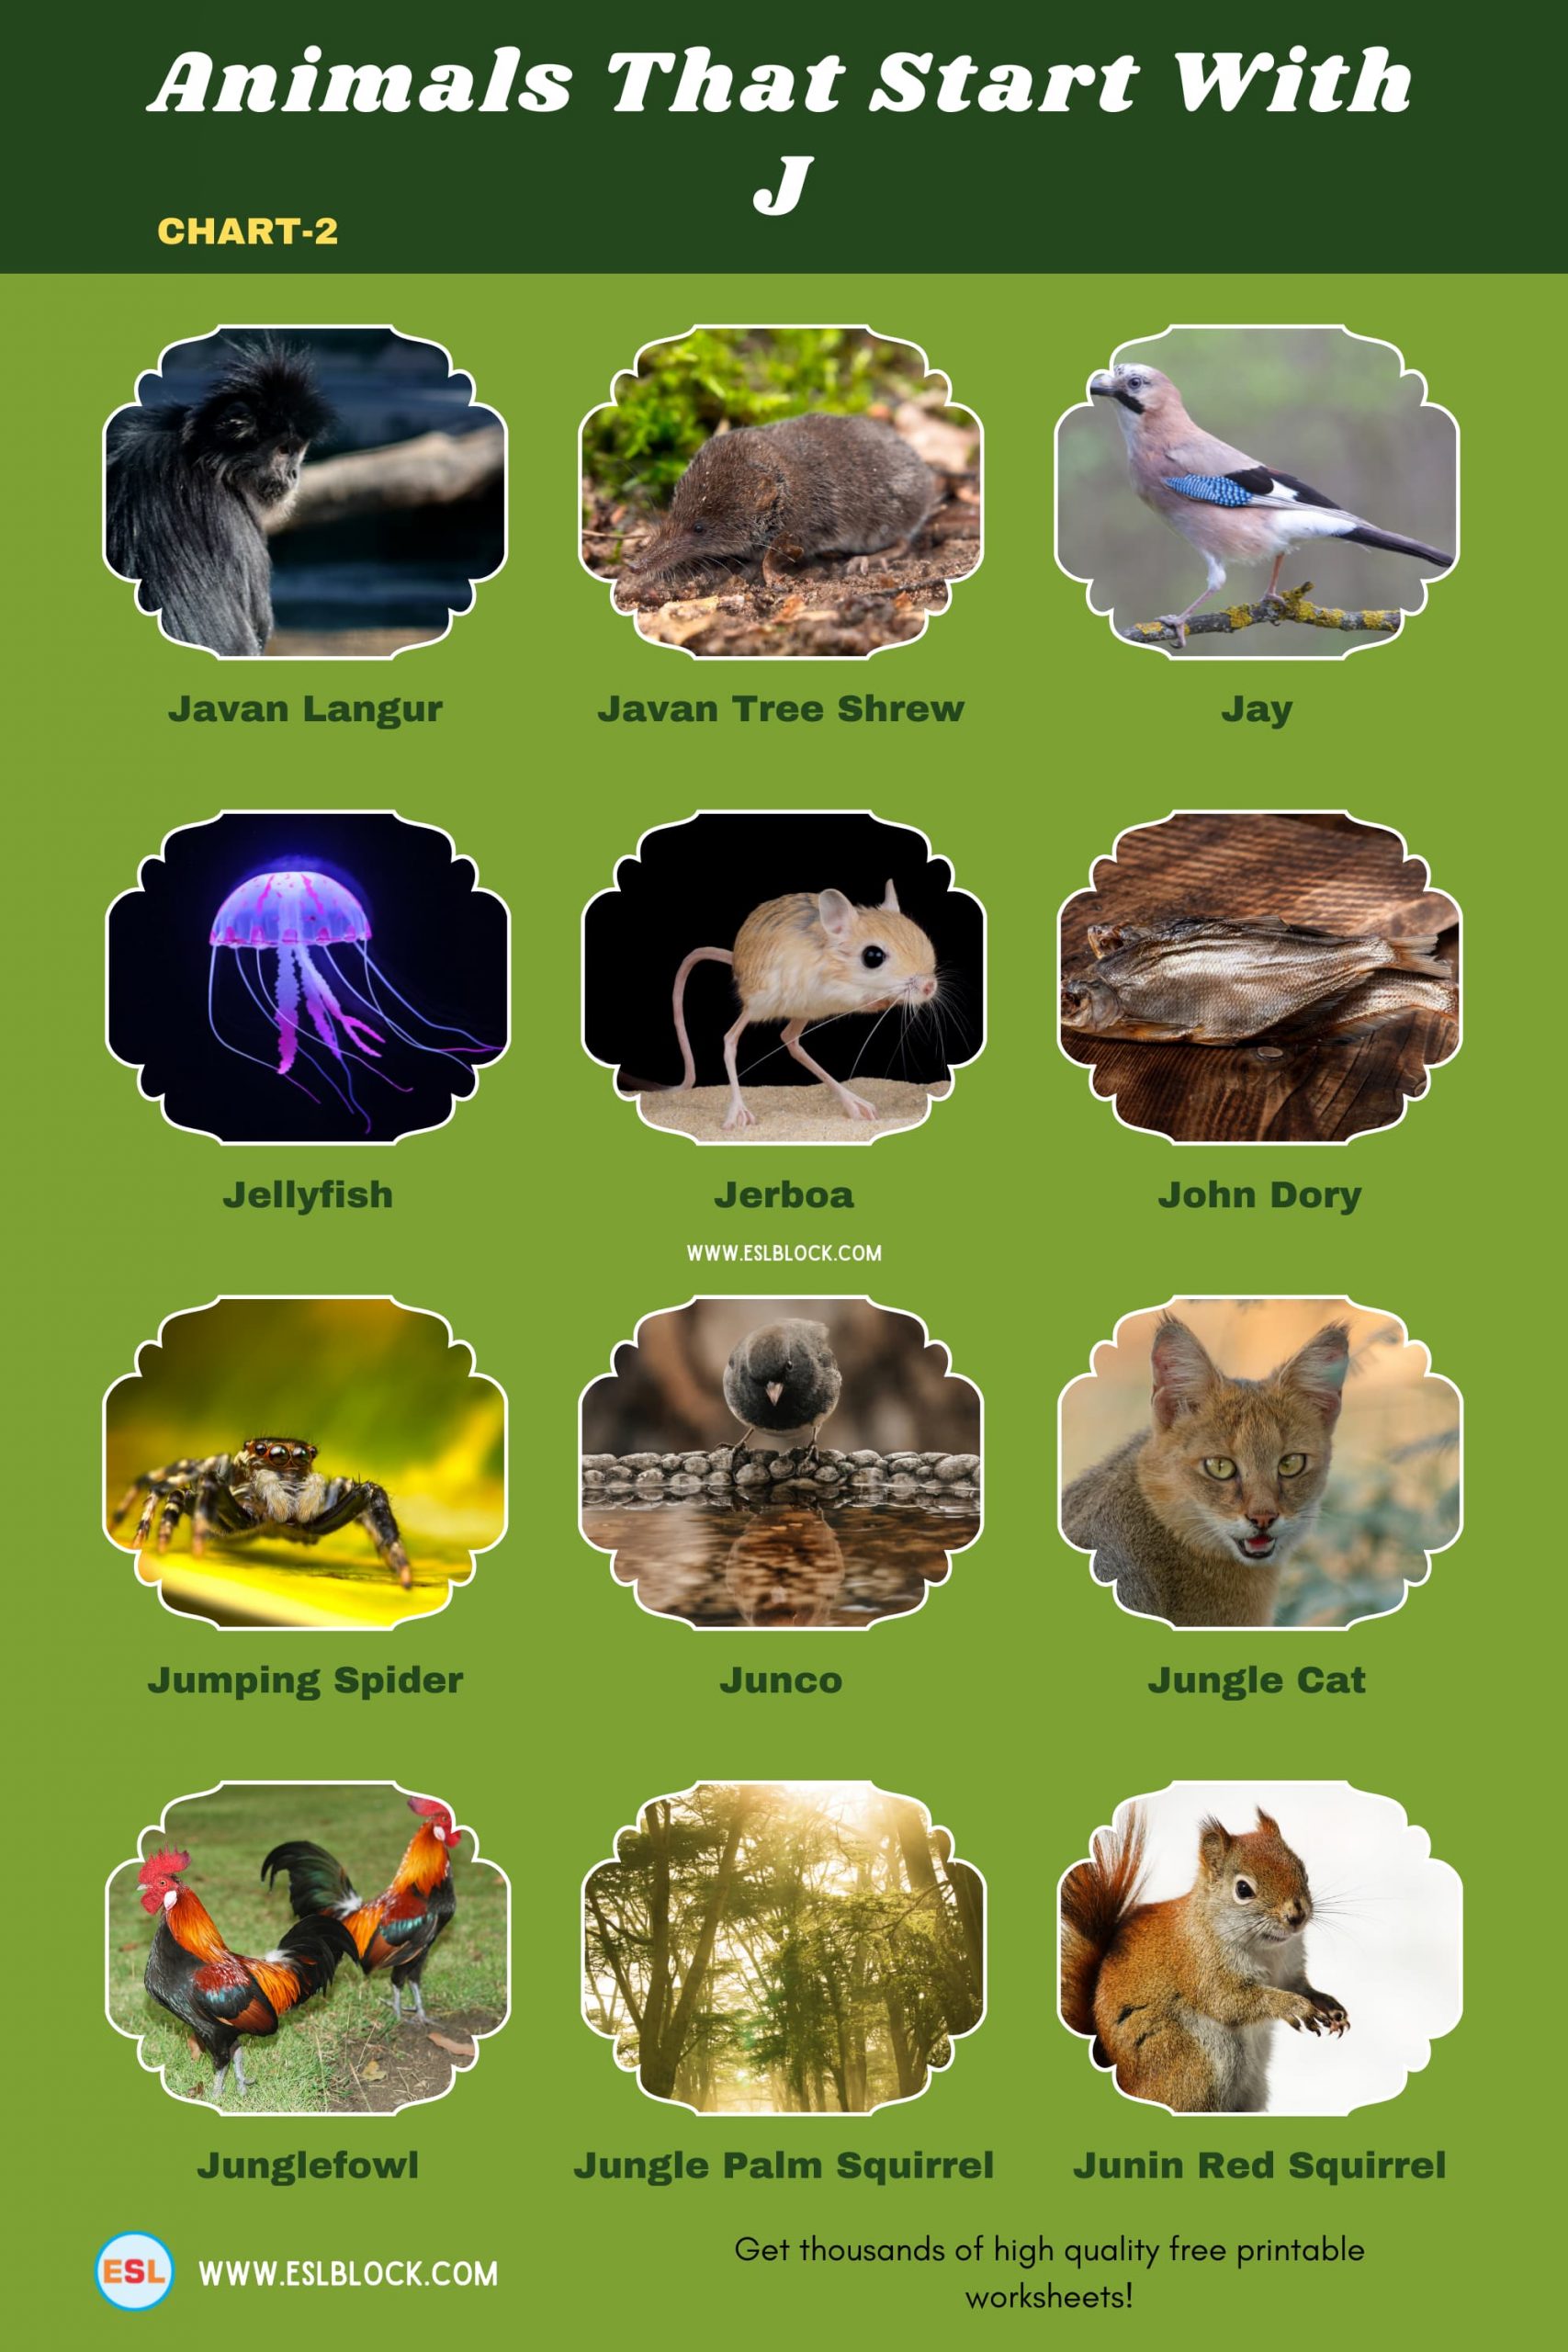 5 Letter Animals Starting With J, Animals List, Animals Names, Animals That Begins With J, Animals That Start With J, English, English Nouns, English Vocabulary, English Words, J Animals, J Animals in English, J Animals Names, List of Animals That Start With J, Nouns, Vocabulary